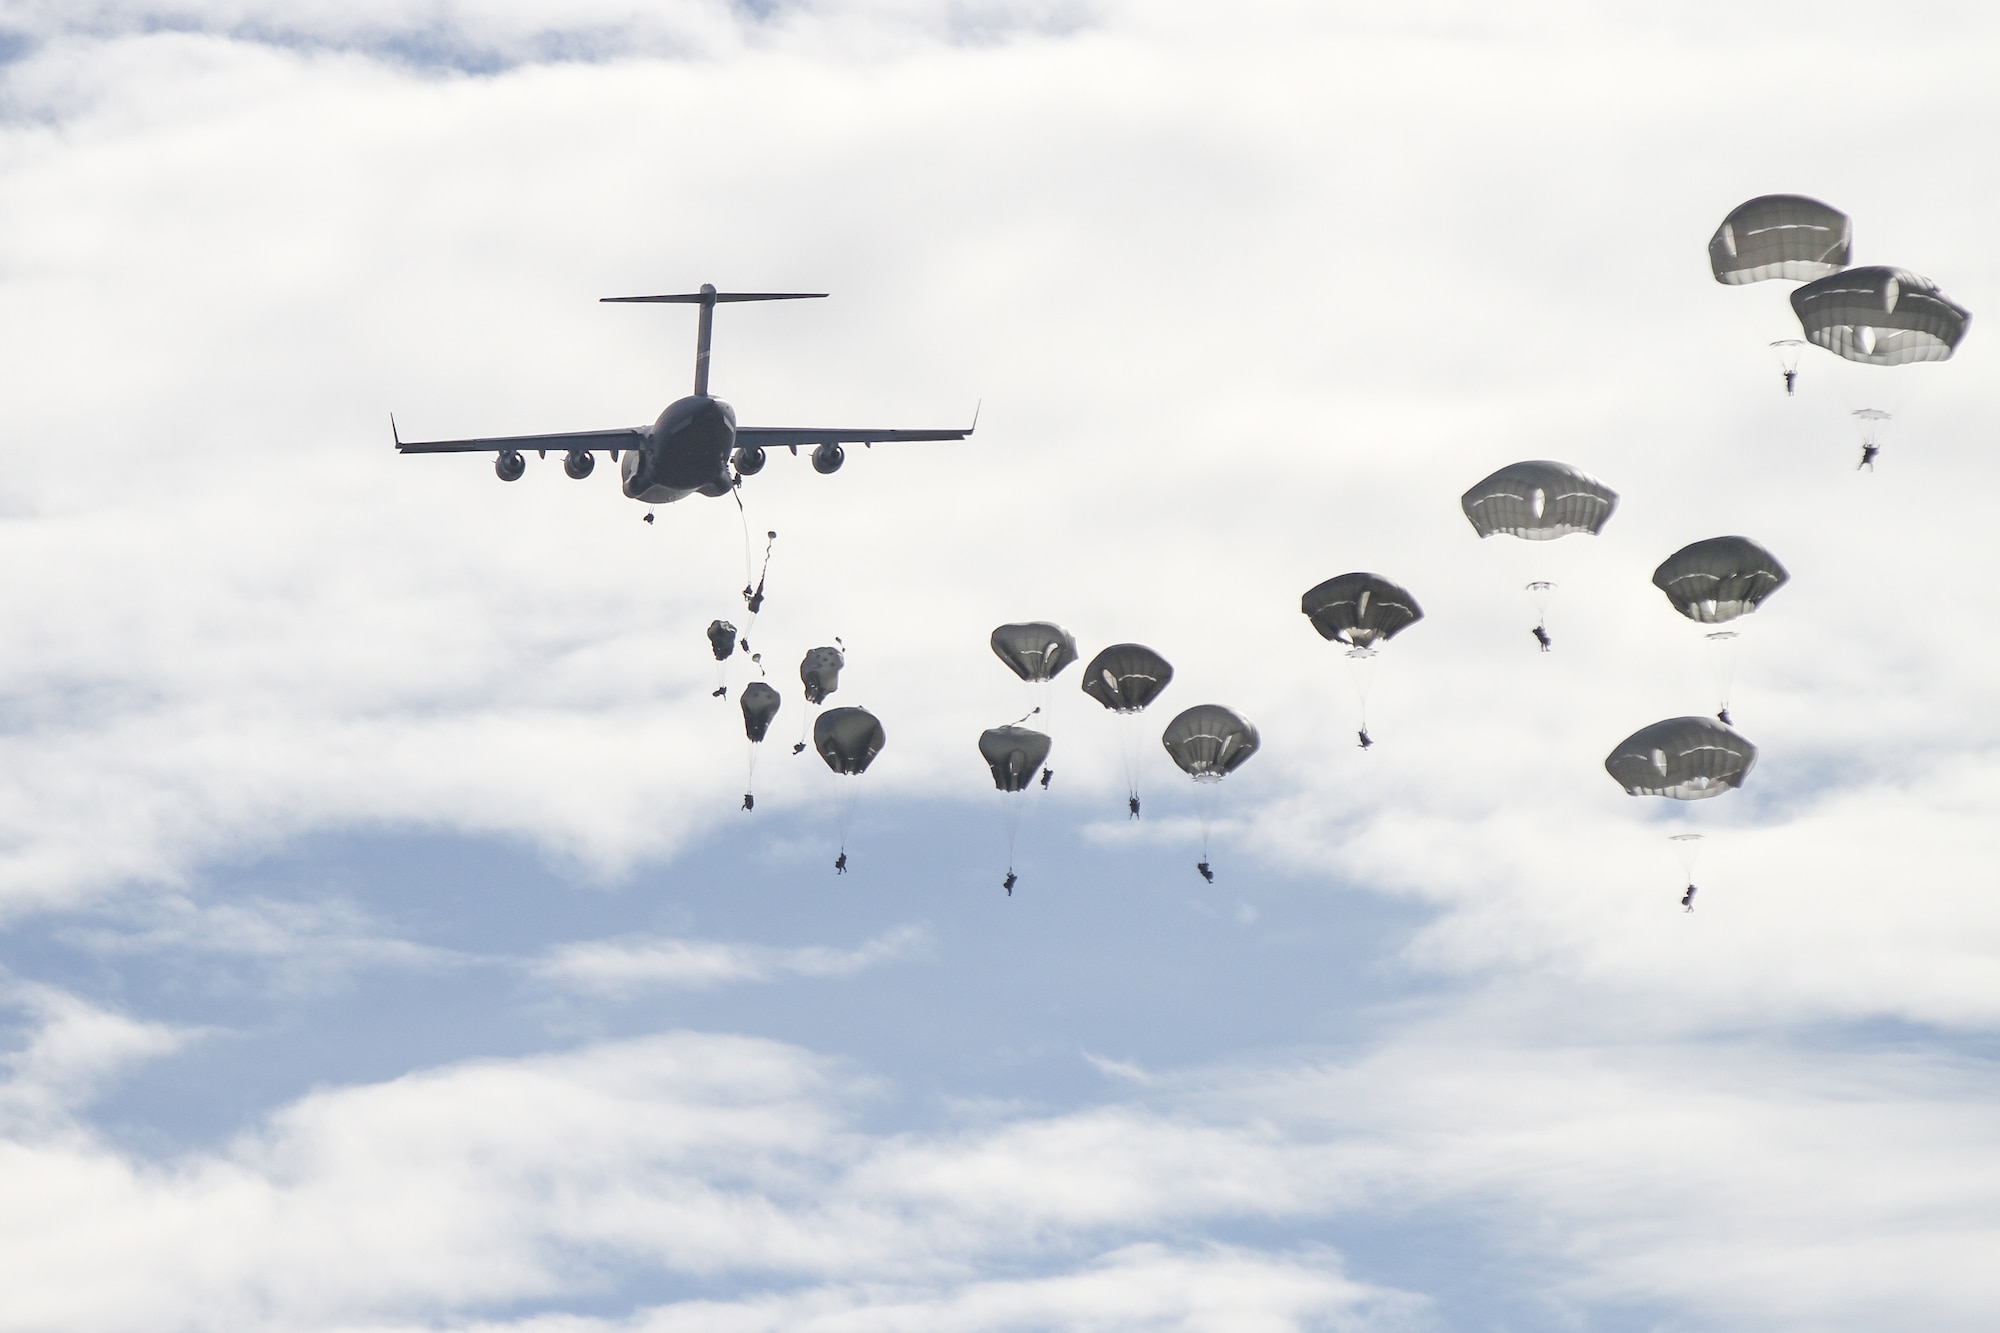 U.S. Army Paratroopers assigned to the 2nd Brigade Combat Team, 82nd Airborne Division parachute from C-17 Globemaster III aircraft for a joint forcible entry operation during the Joint Land Heavy Military Demonstration of Operation Trident Juncture; the largest NATO exercise conducted in the past 20 years, near San Gregorio, Spain, Nov. 4, 2015. U.S. and NATO forces remain engaged, postured and ready to assure, deter and defend in an increasingly complex security environment. (U.S. Army photo by Staff Sgt. Jason Hull)